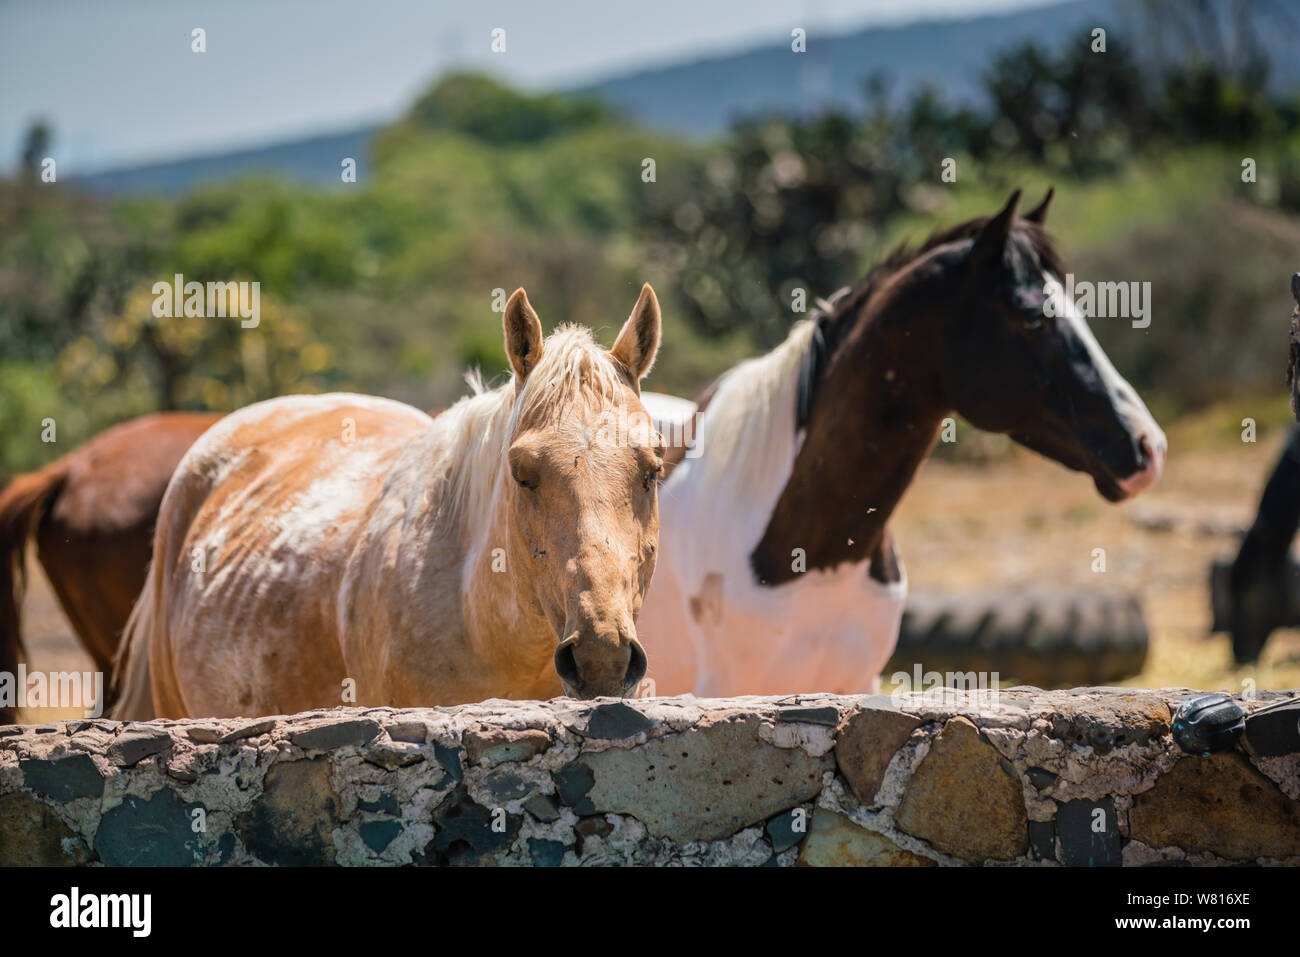 skewbald - brown and white and piebald - black and white horses in a field in mexico Stock Photo